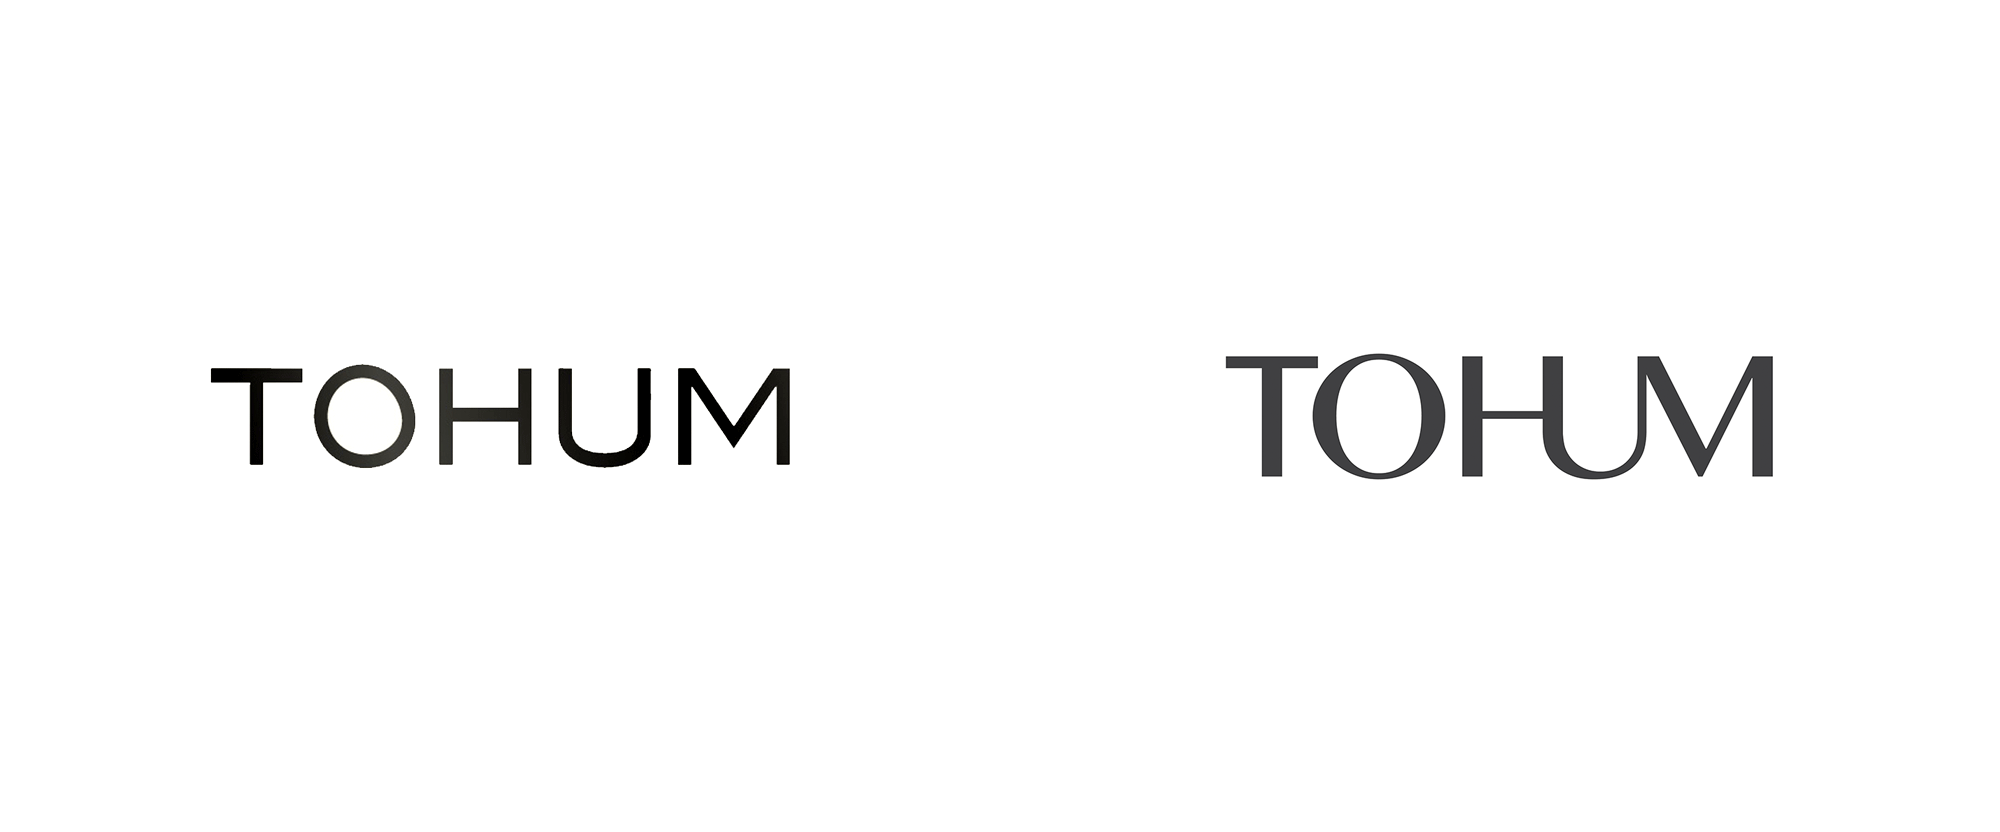 New Logo and Packaging for Tohum by Pearlfisher